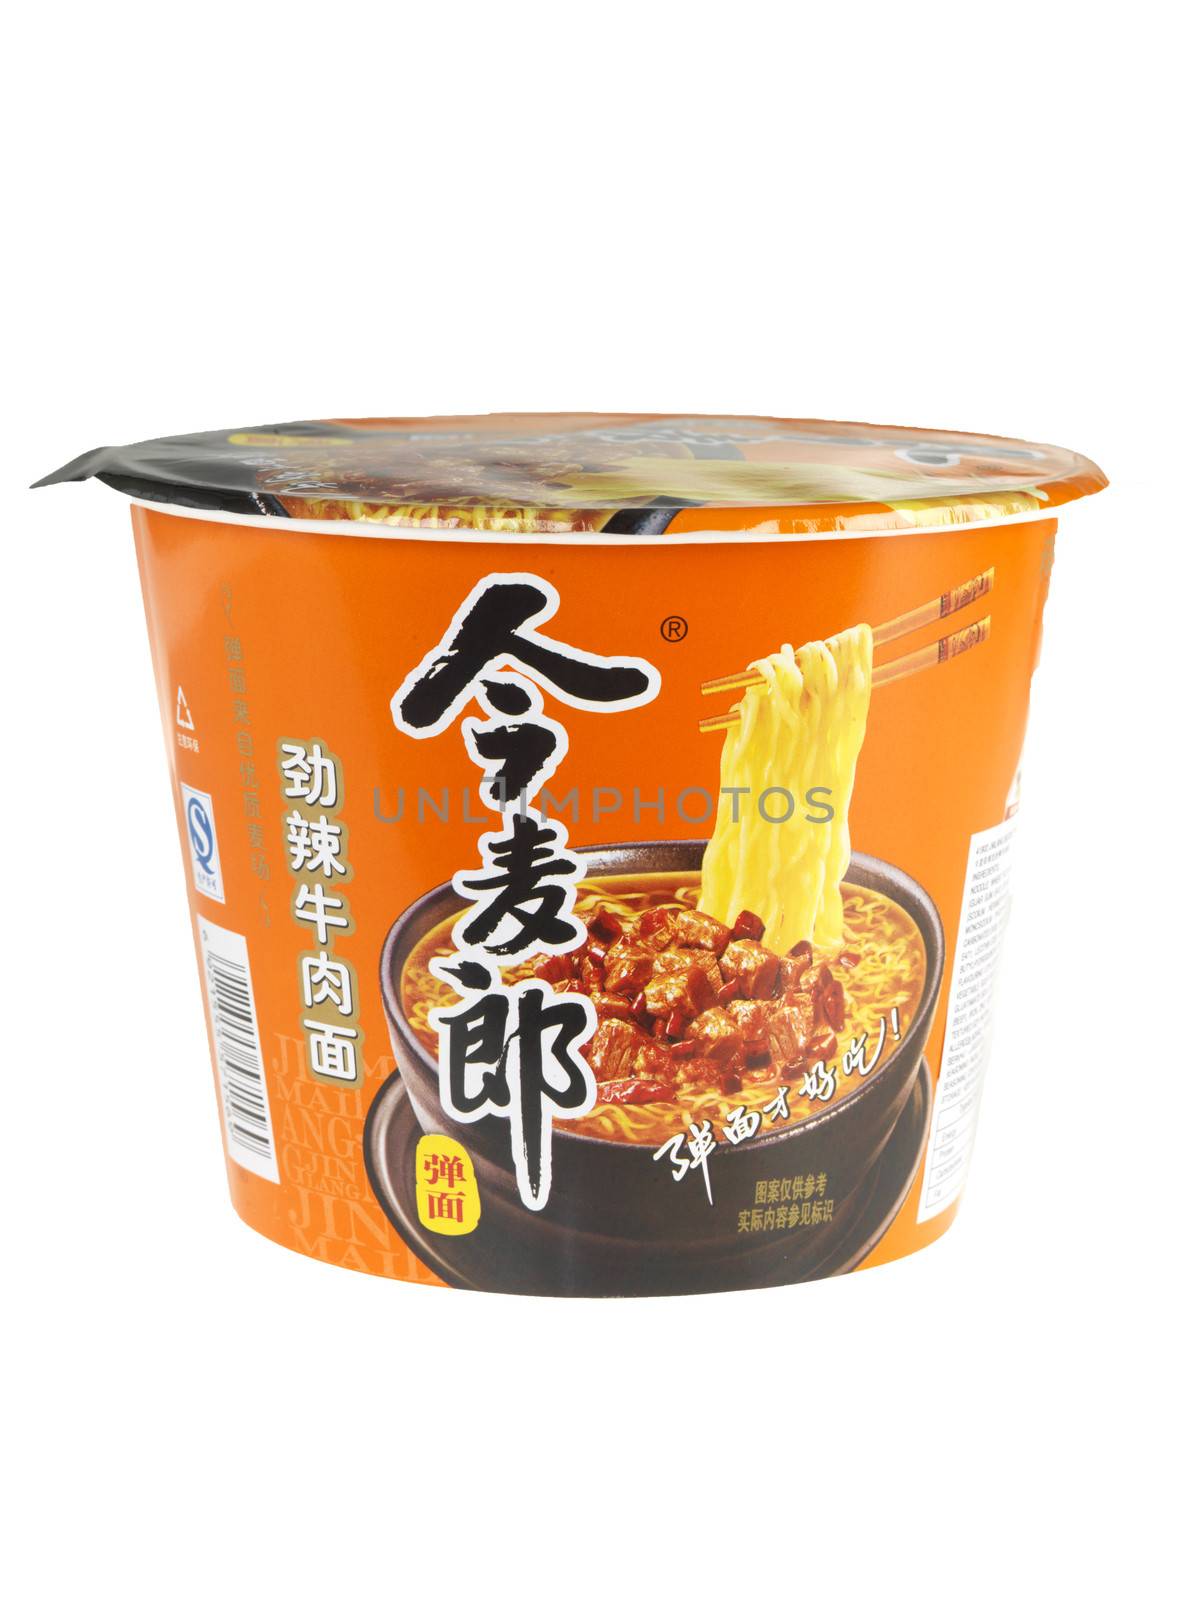 Carton of Intant Noodles by Whiteboxmedia